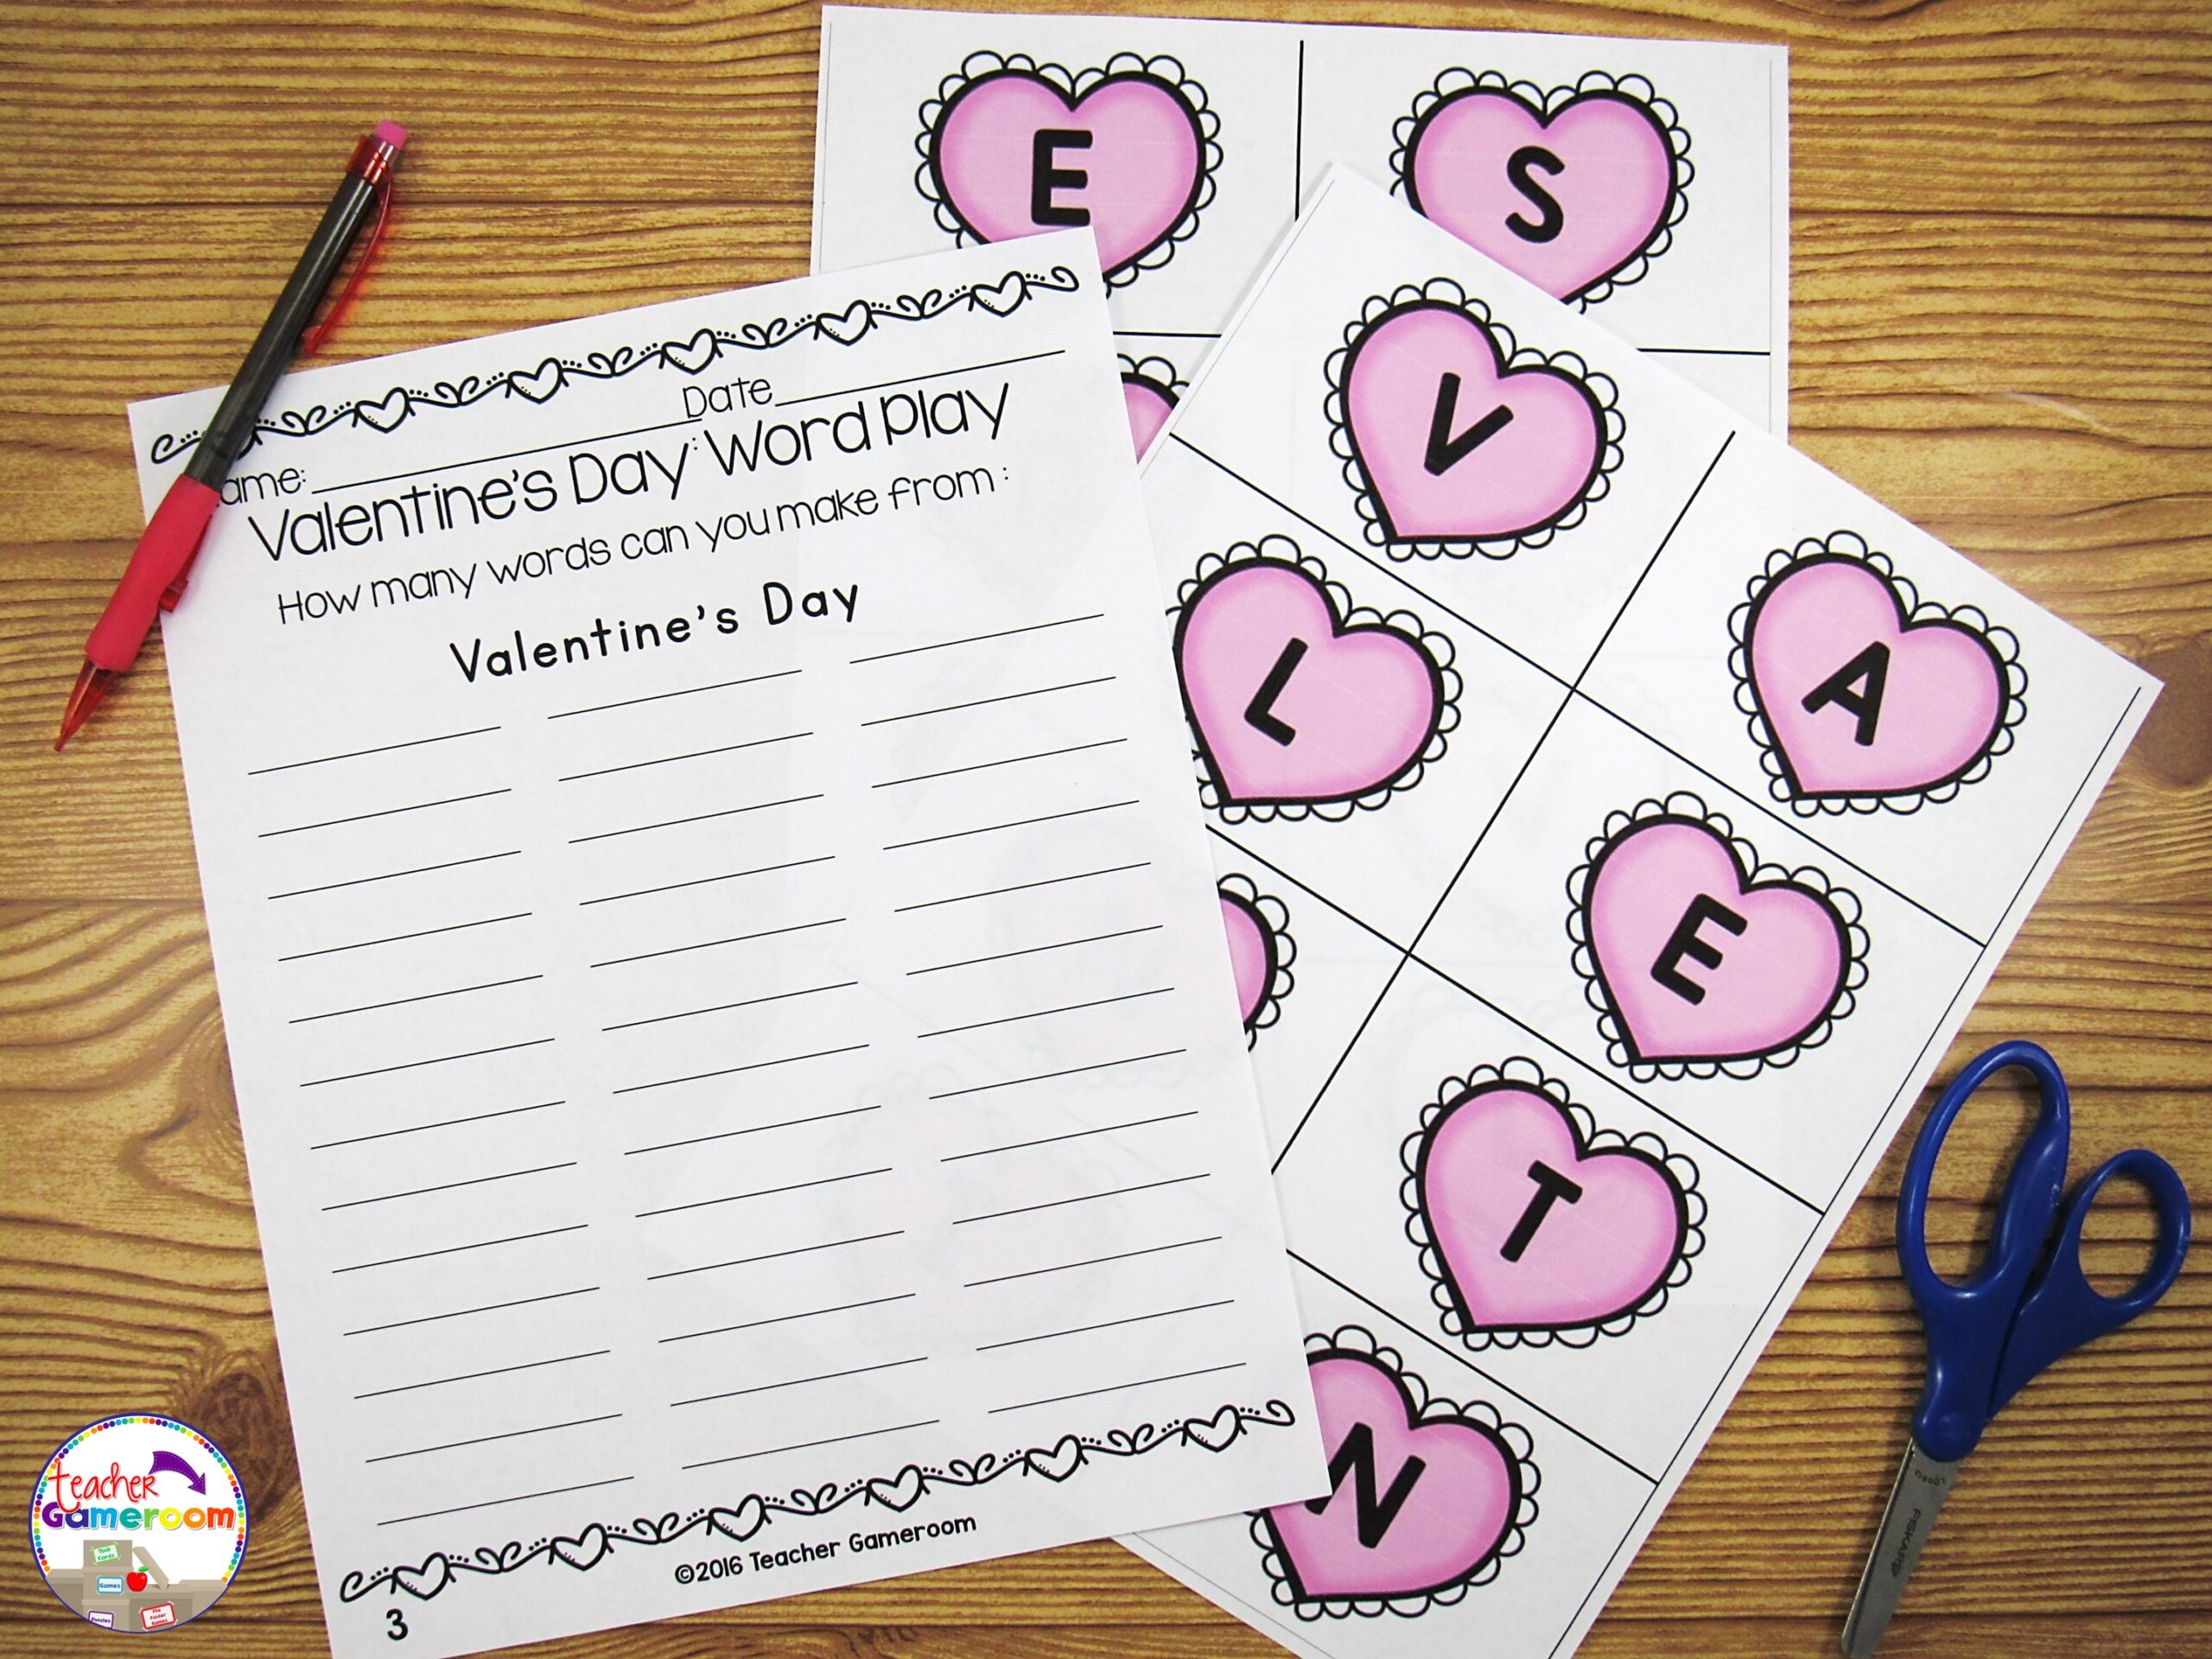 5 Valentine's Day Activities for Students by Teacher Gameroom